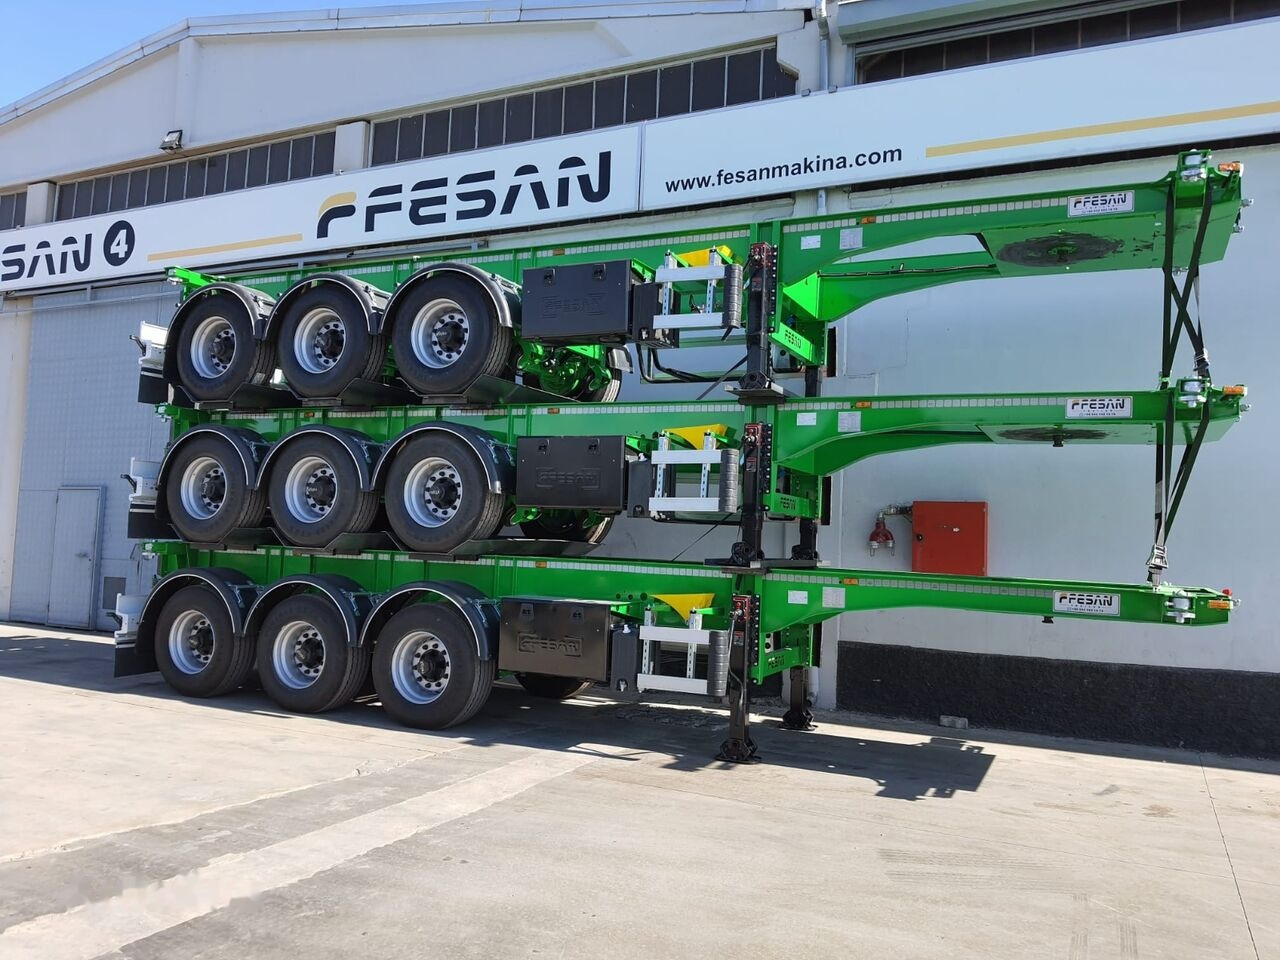 Fesan CONTAINER CARRIER CHASSIS 20 FEET, 30 FEET, 40 FEET, 40 FEET HC в лизинг Fesan CONTAINER CARRIER CHASSIS 20 FEET, 30 FEET, 40 FEET, 40 FEET HC: фото 6